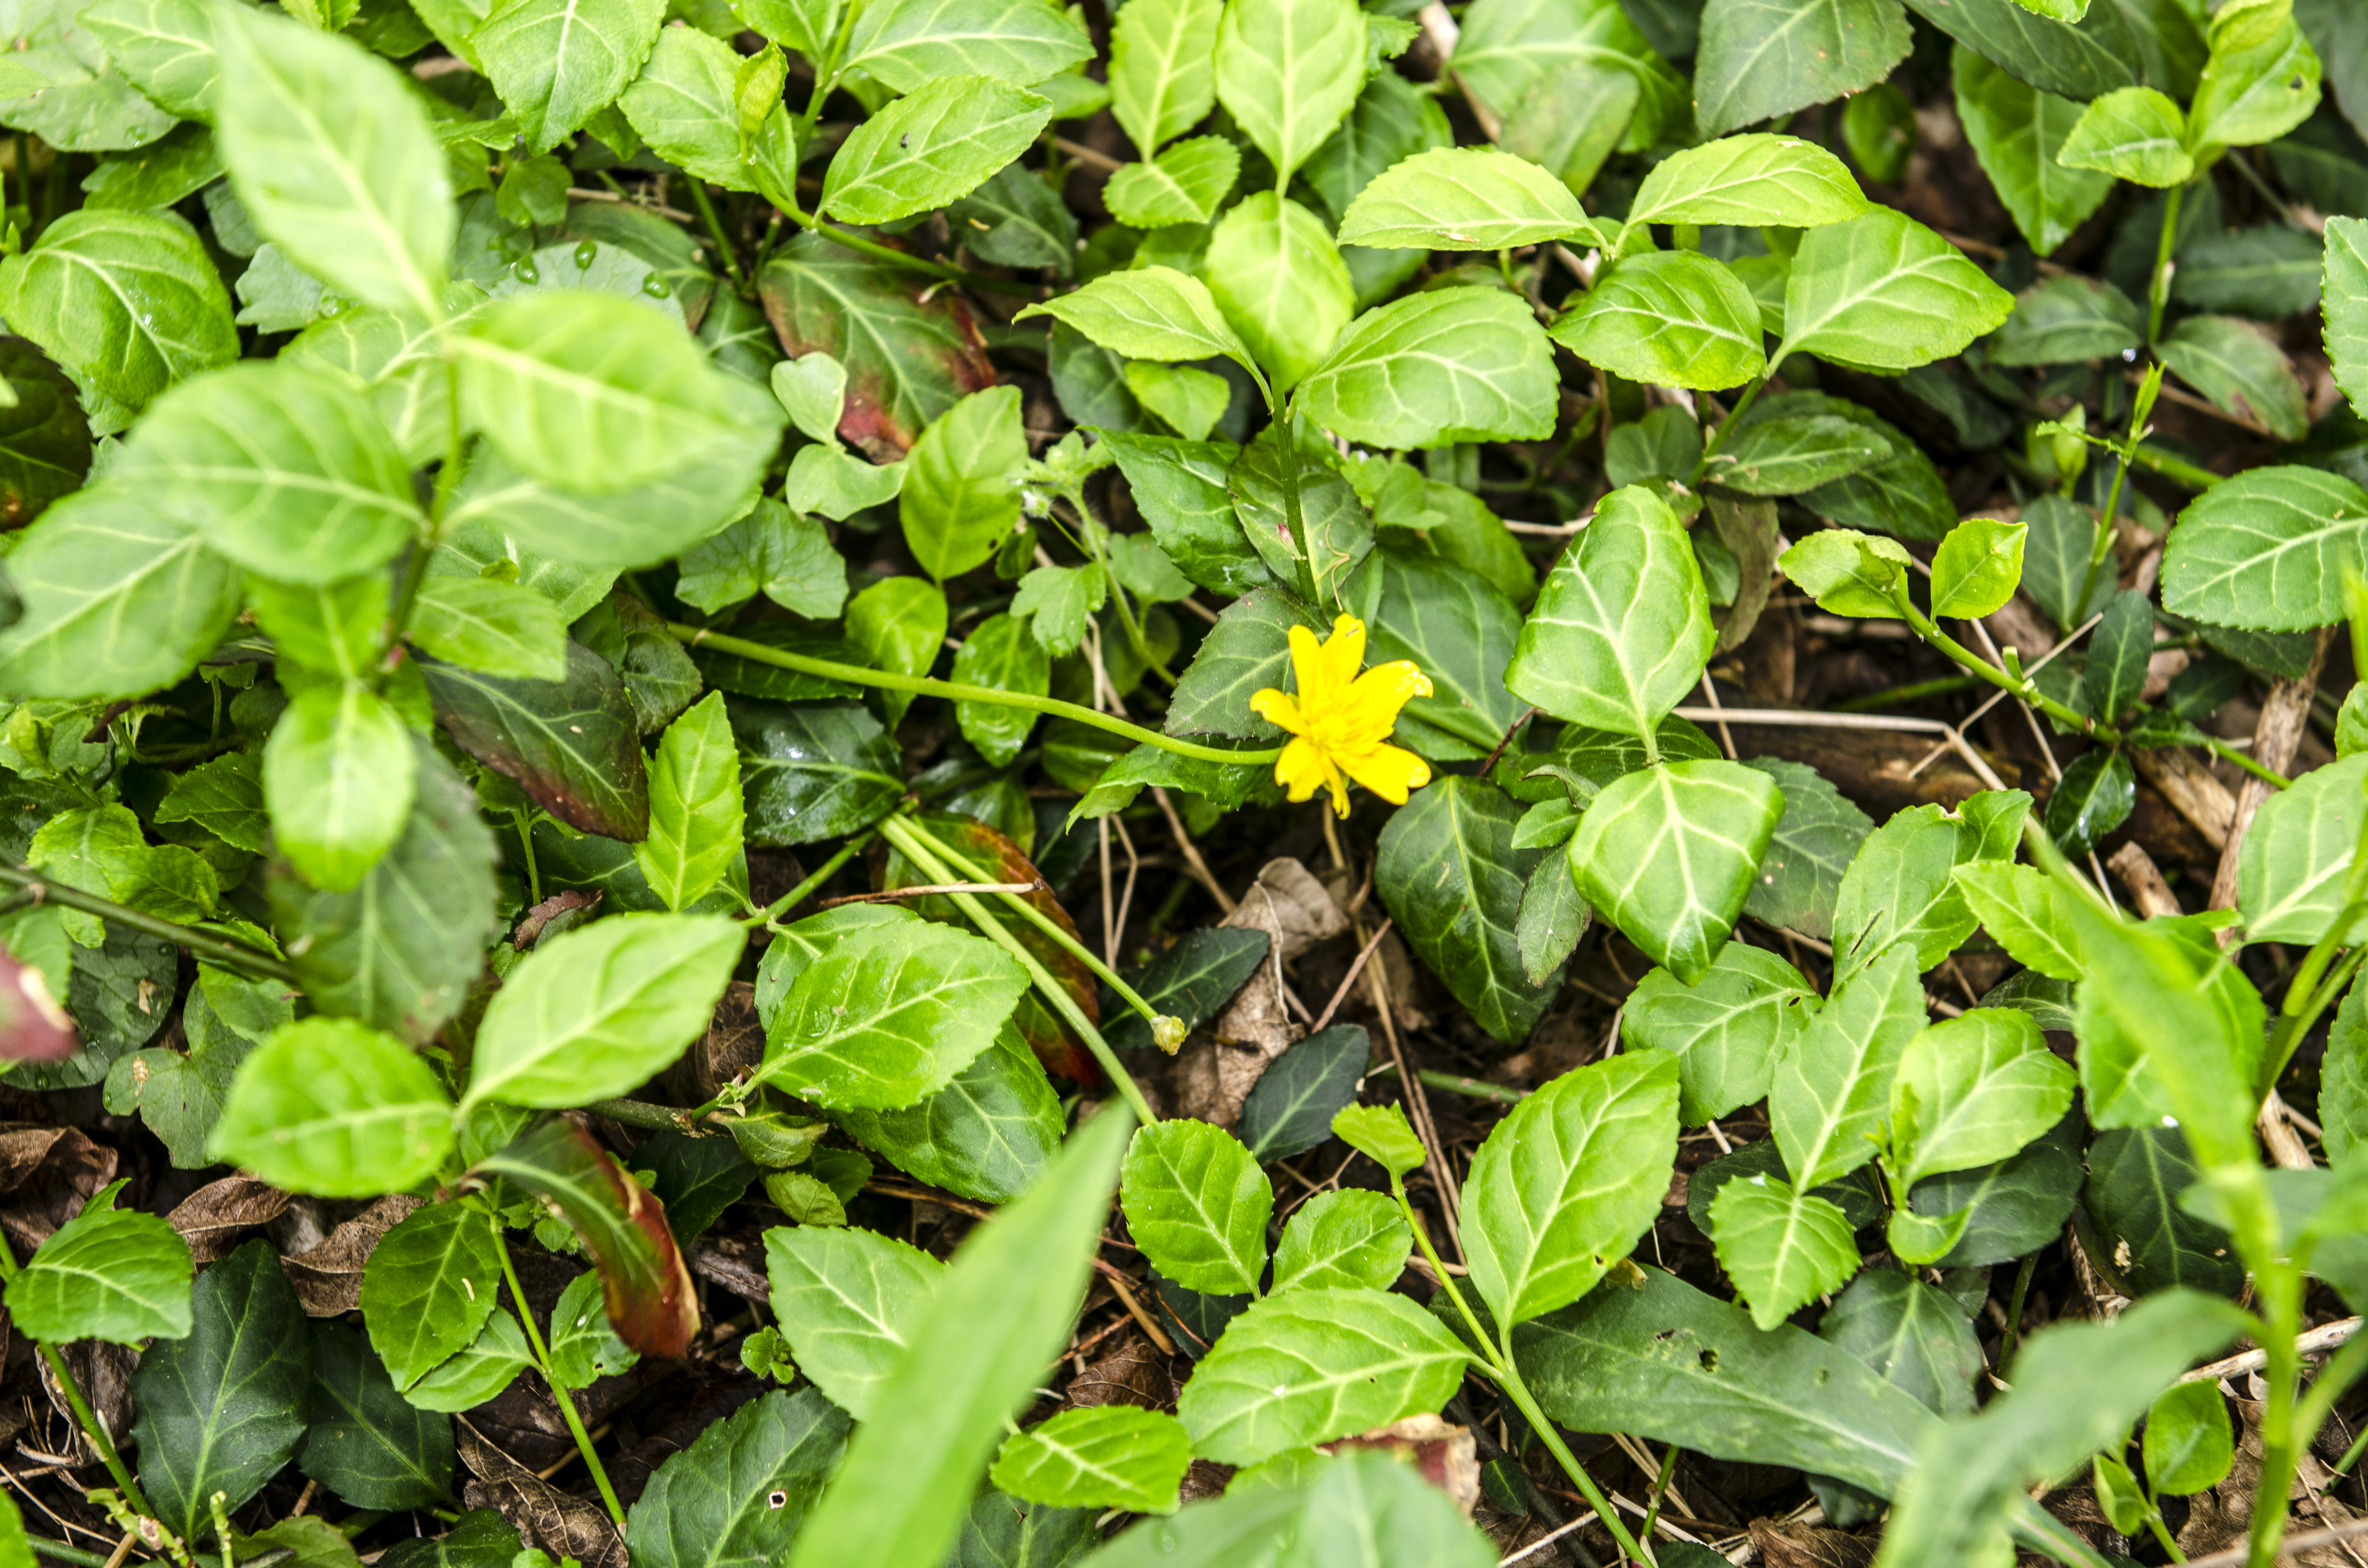 Lesser celandine competes with wintercreeper for space in woodlands. Both are nonnative, invasive plants. Photo by Ellen Crocker